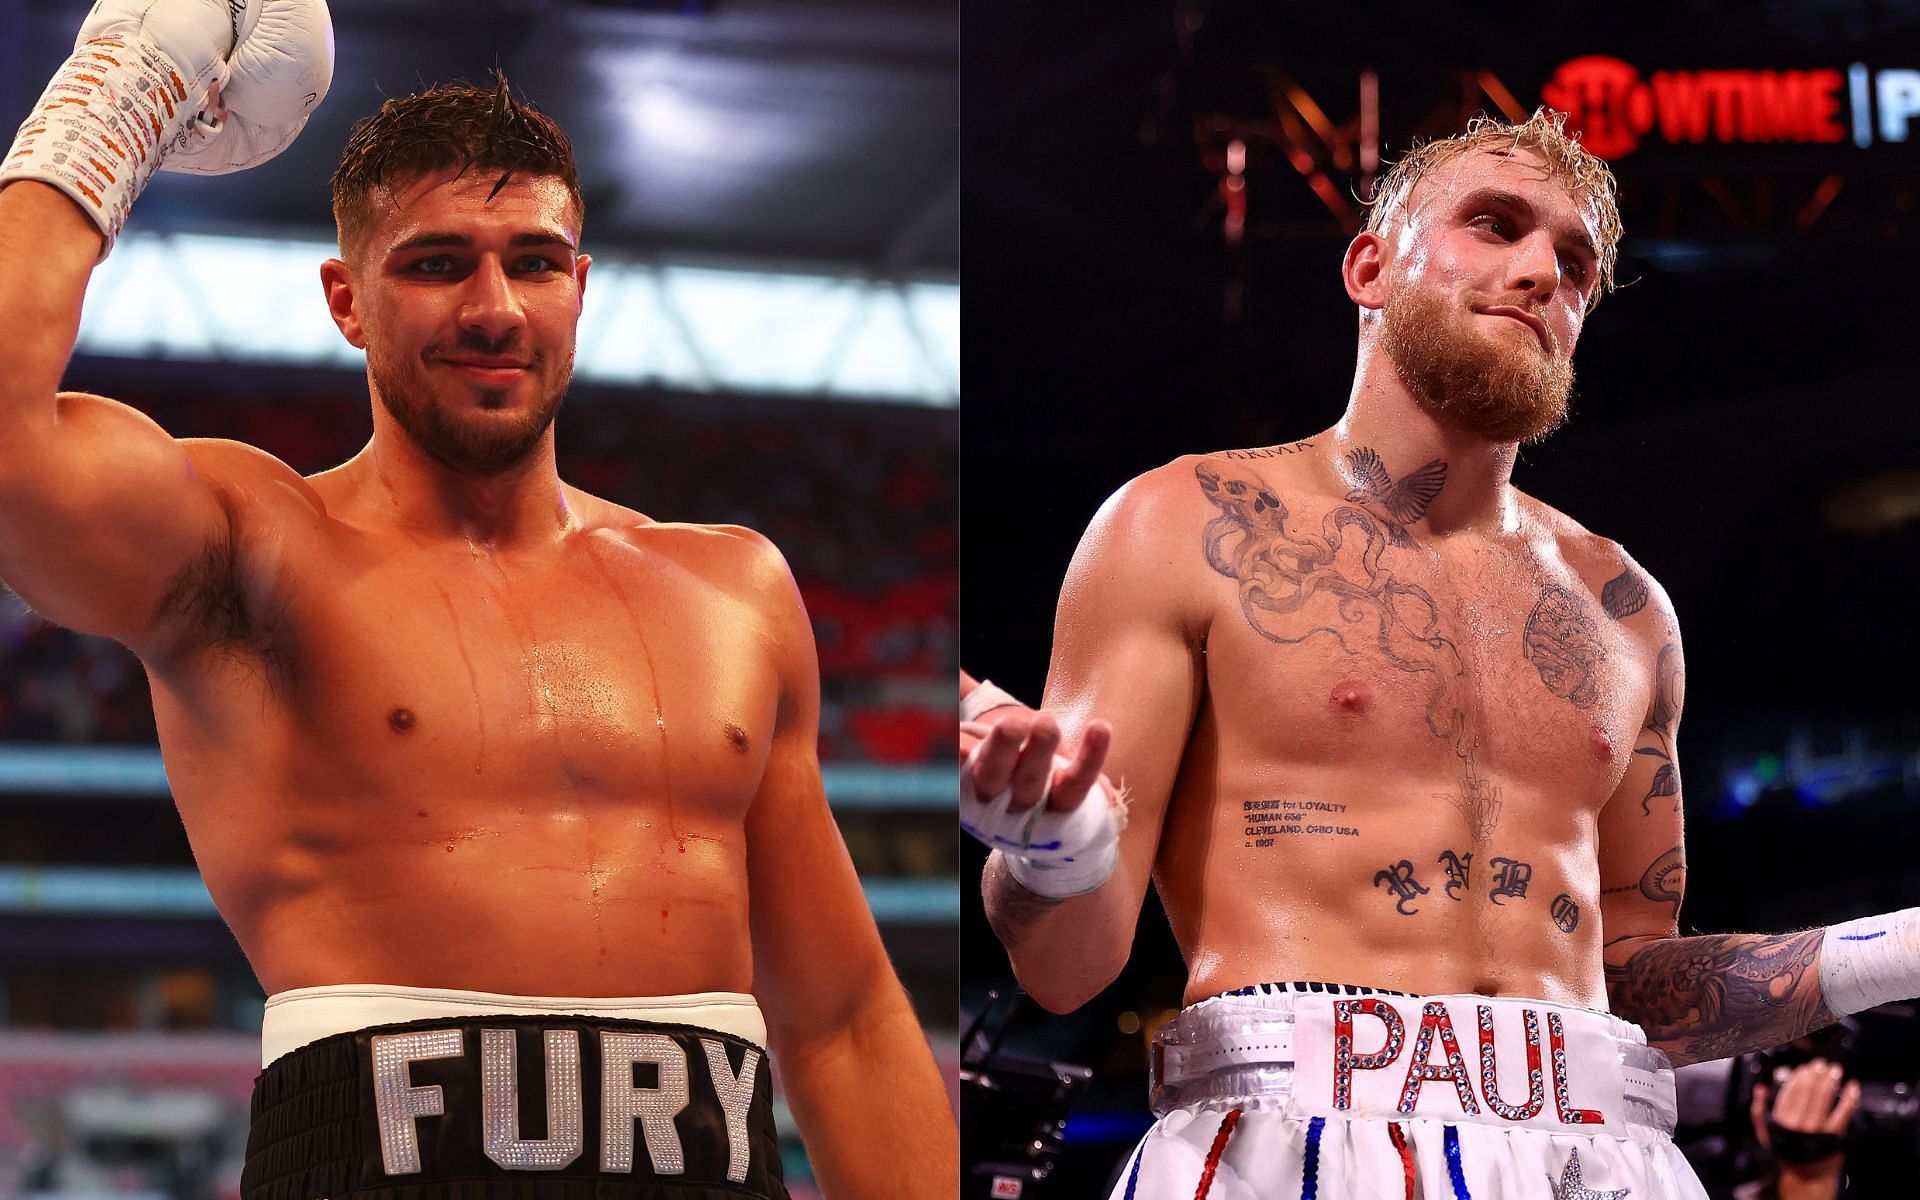 Tommy Fury (left) and Jake Paul (right) (Image credits Getty Images)